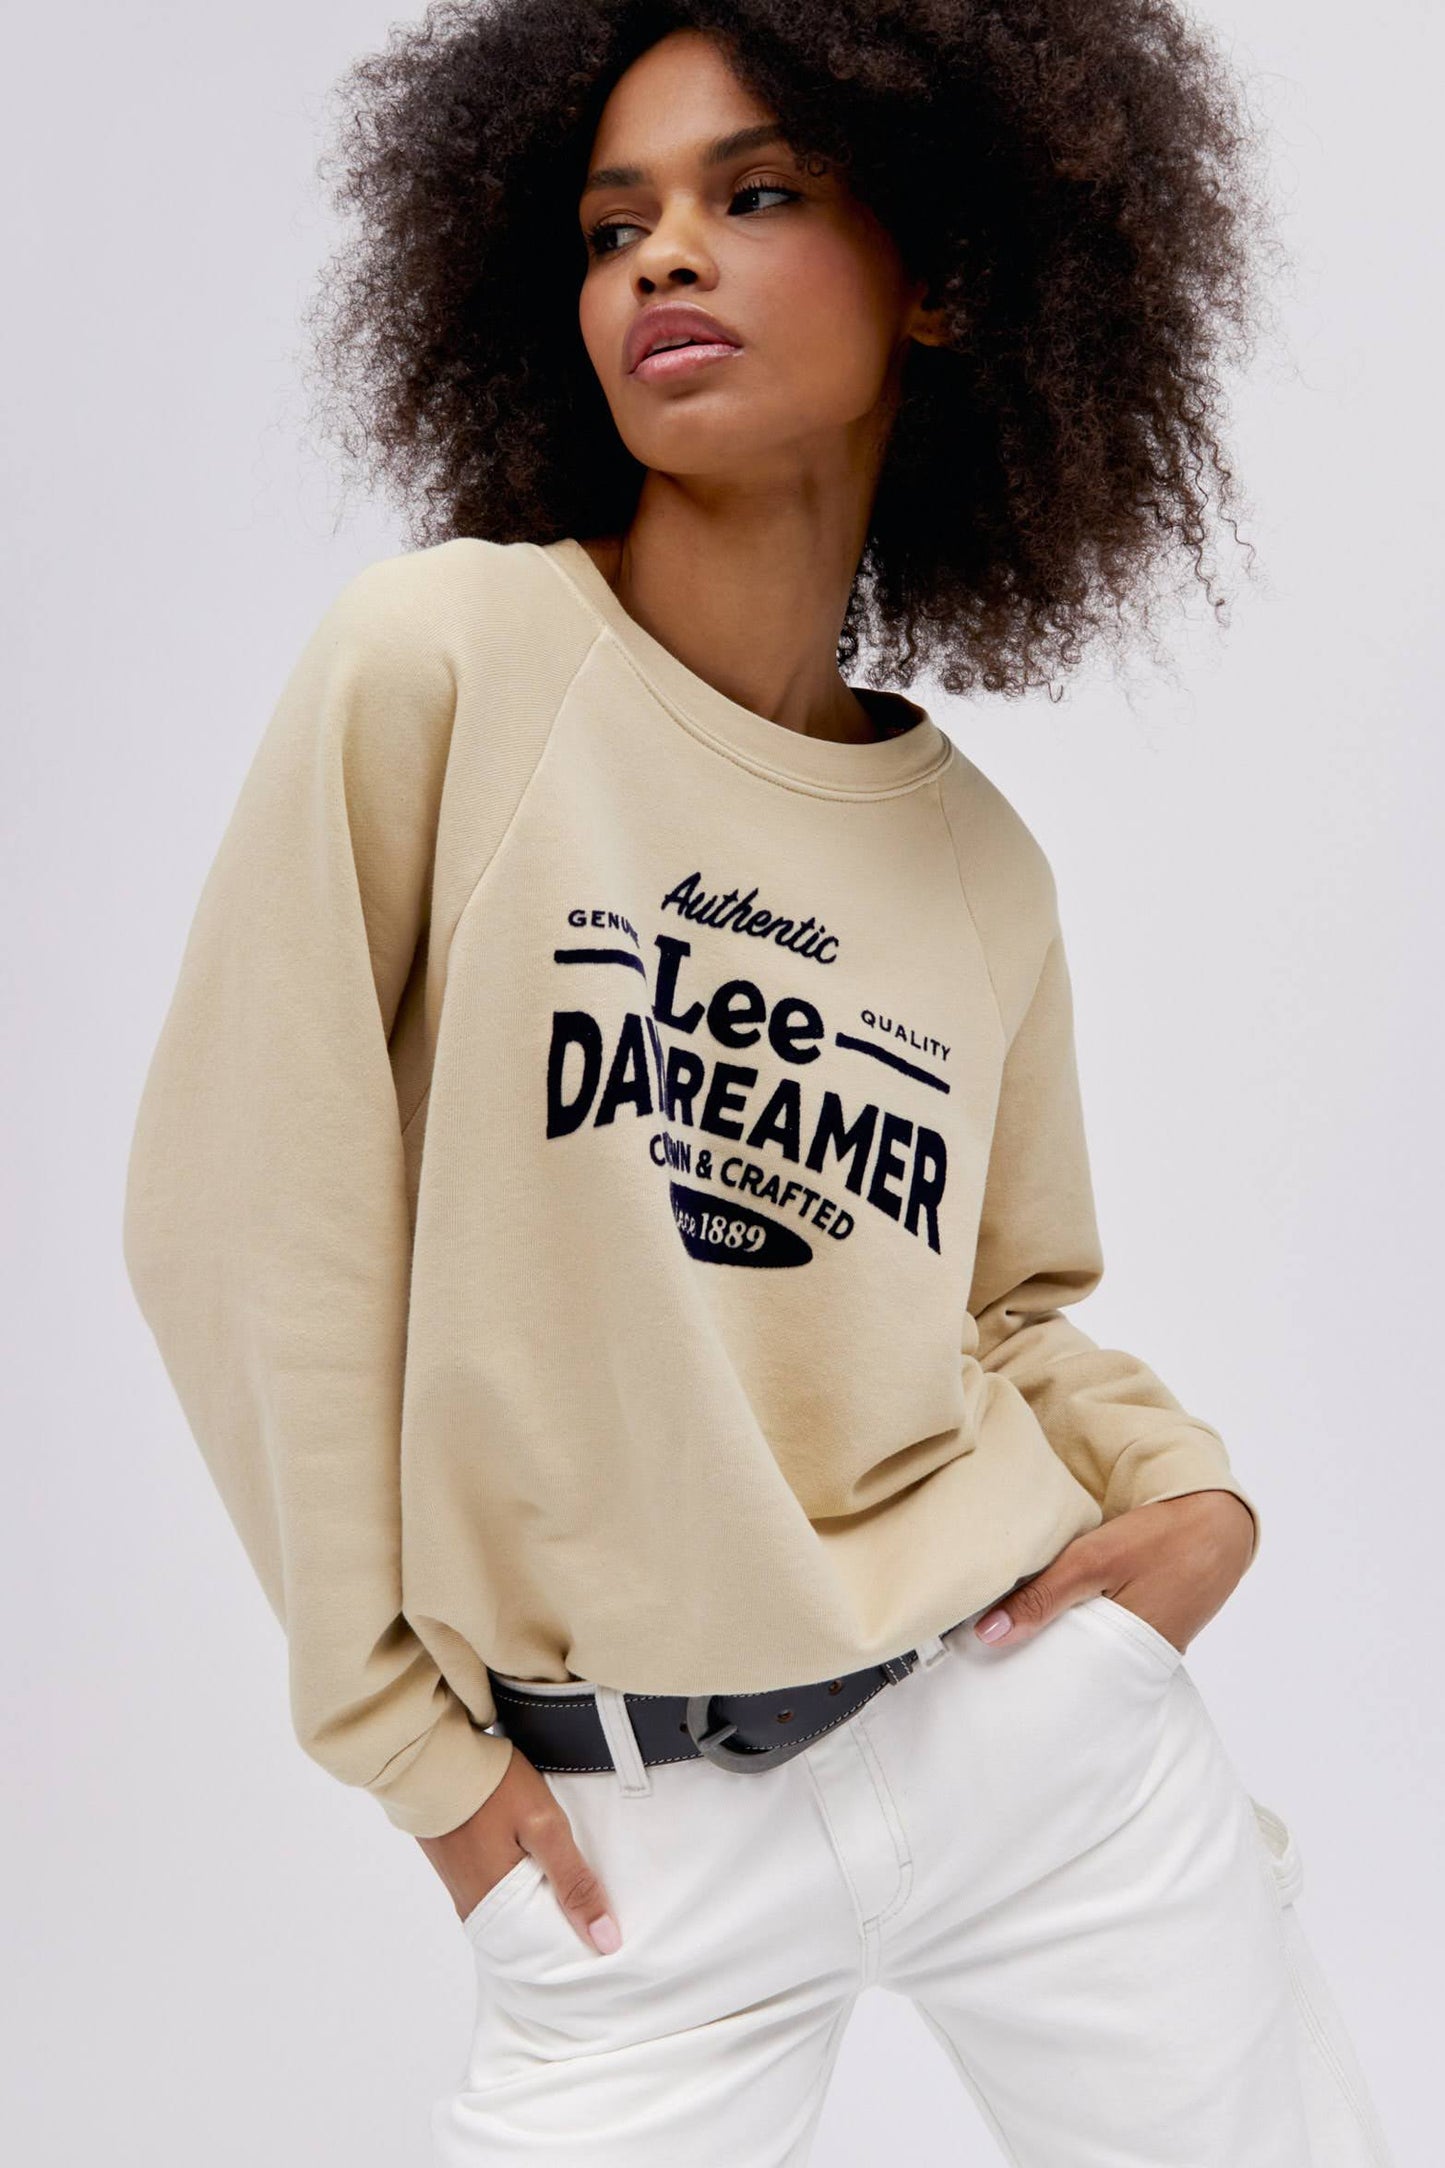 curly haired model posing with hands in pockets wearing a khaki colored sweatshirt